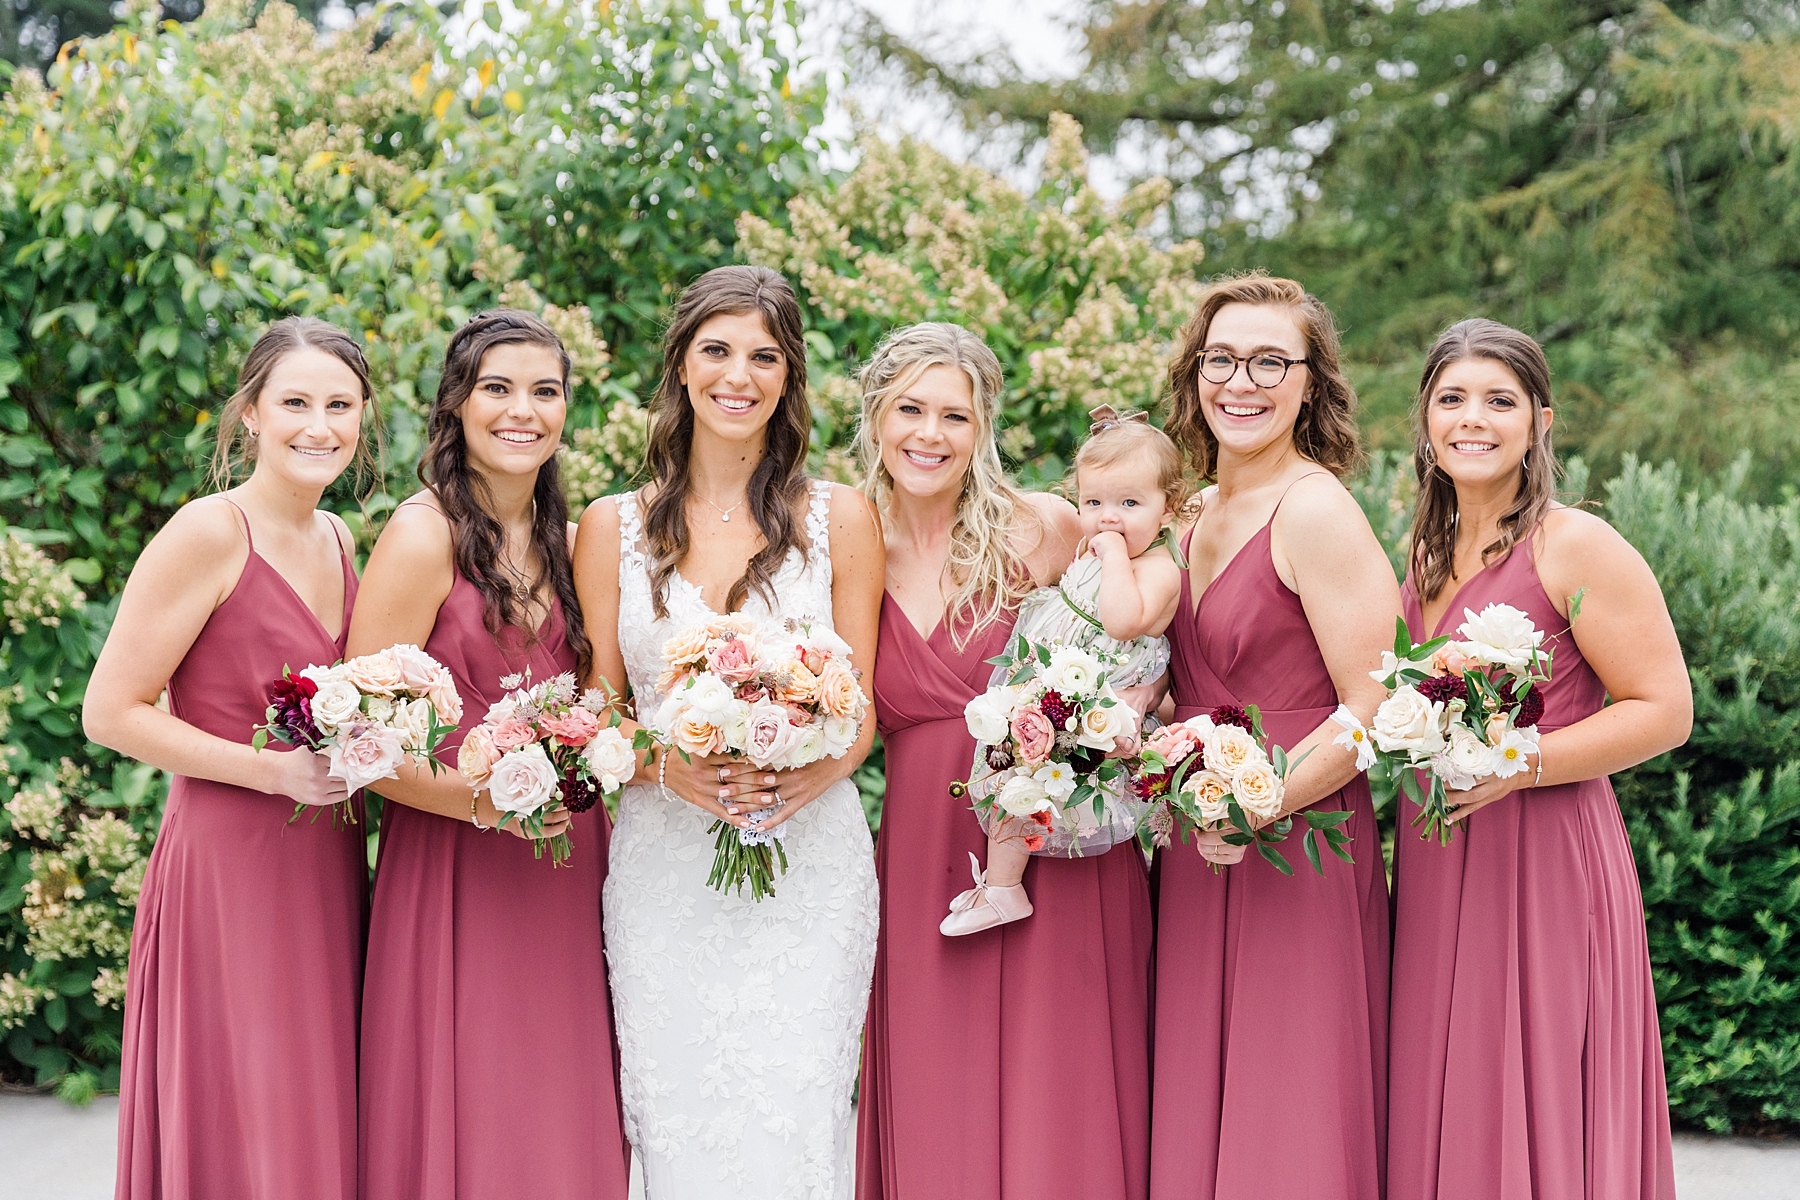 bride and bridesmaids holding romantic wedding bouquets